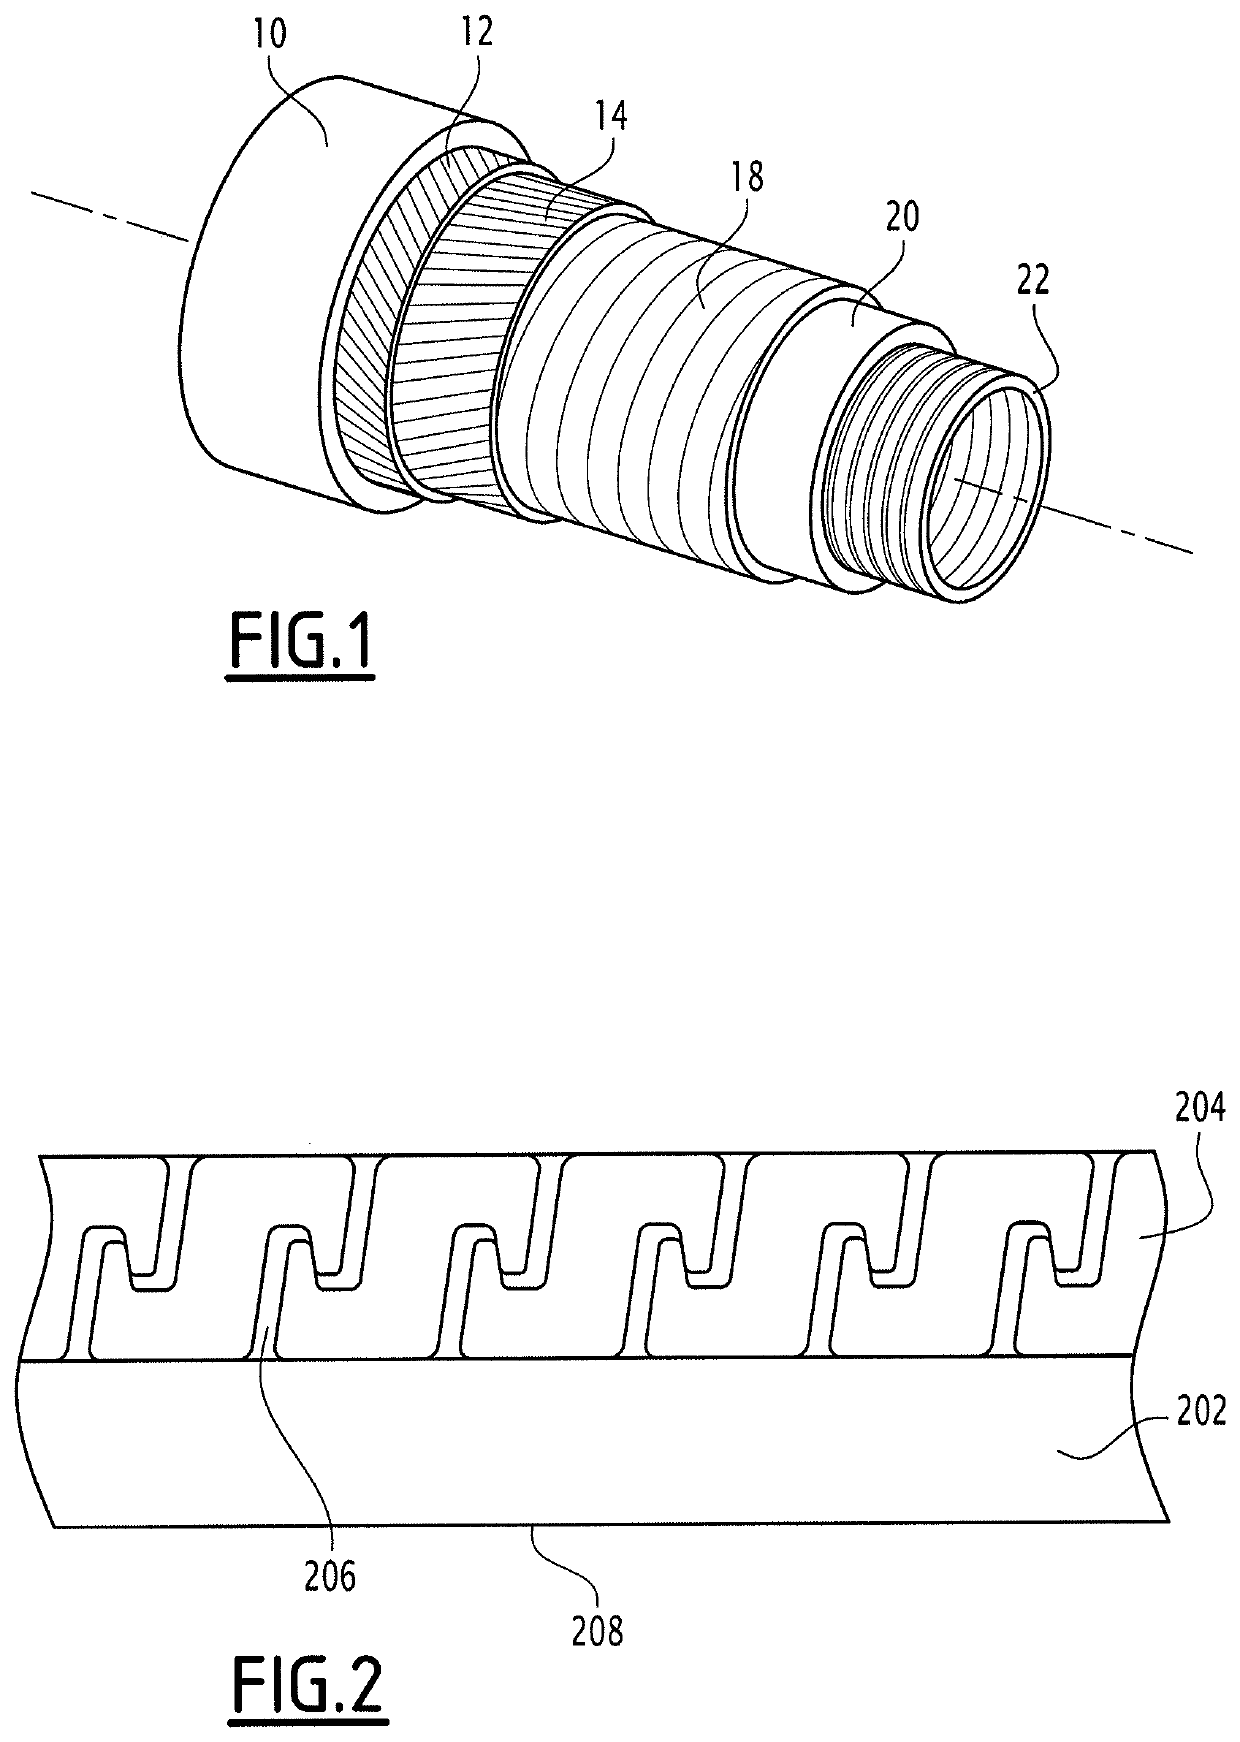 Method for pressurizing the inner flow space of a flexible pipe intended for transporting hydrocarbons